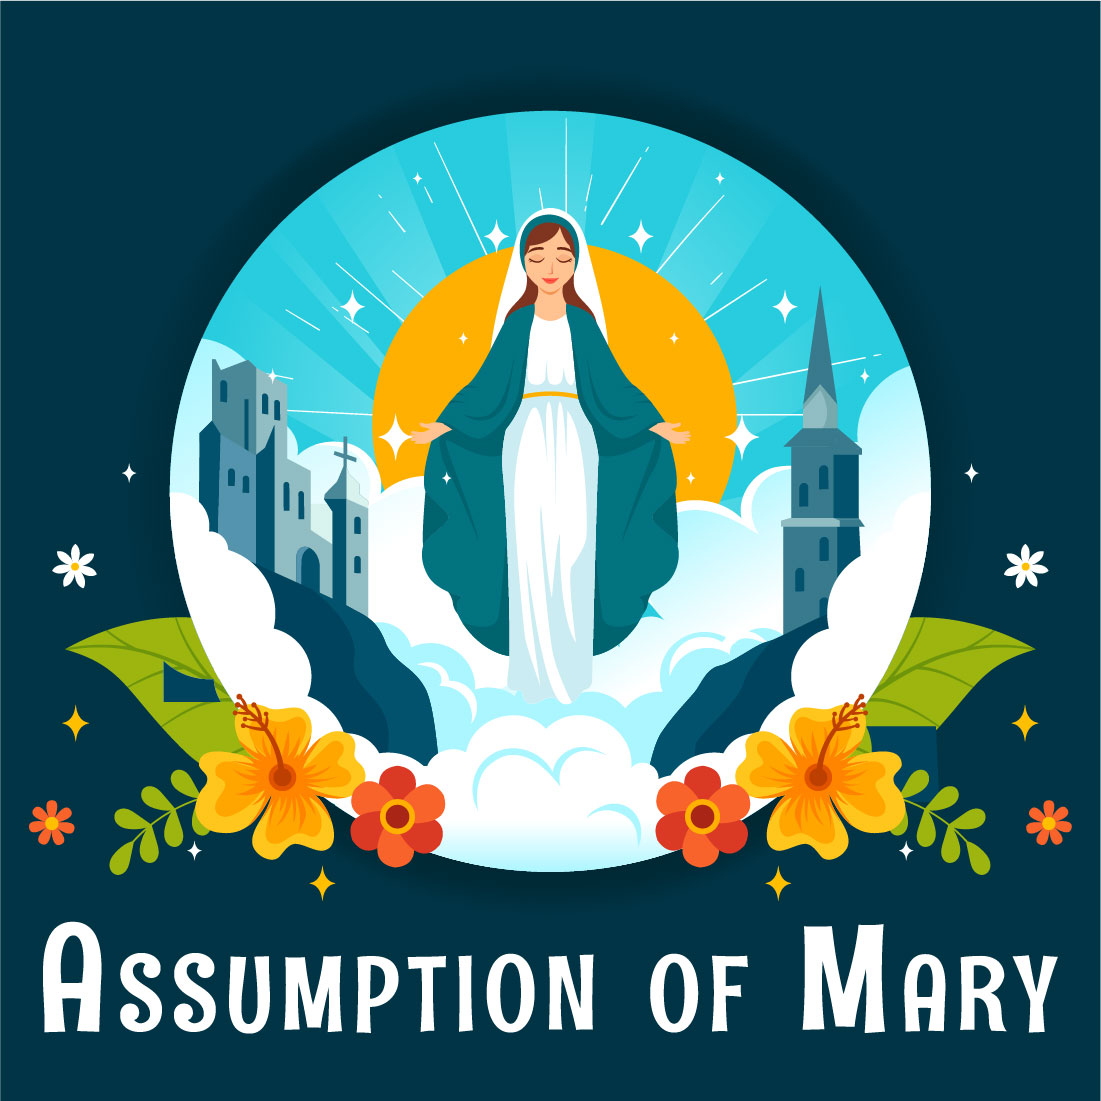 11 Assumption of Mary Illustration cover image.